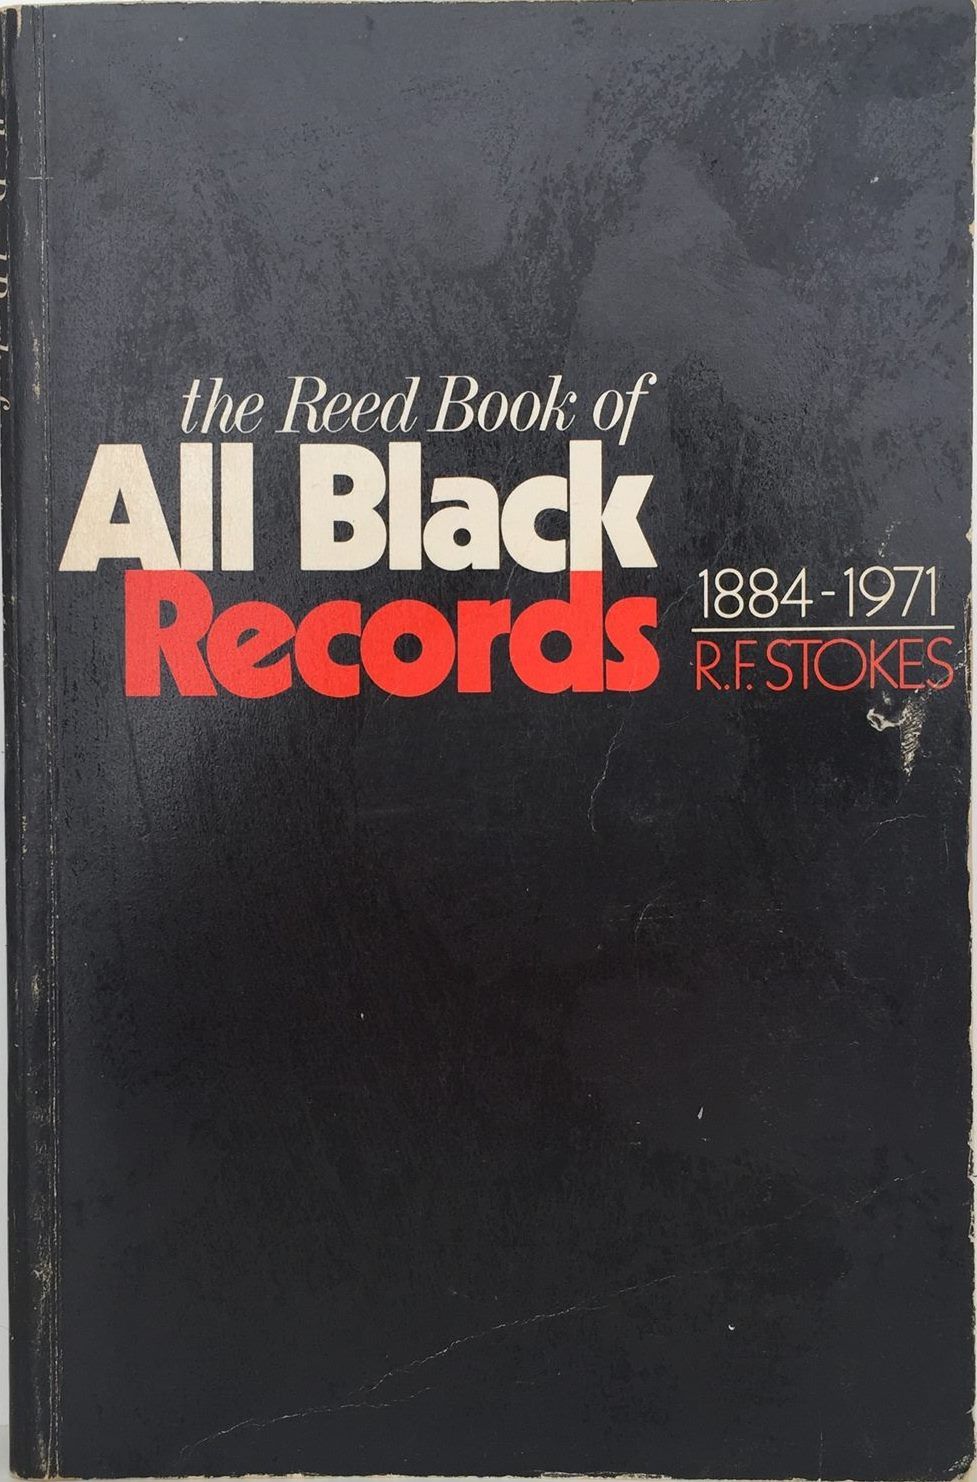 The Reed Book of ALL BLACK RECORDS 1884-1971